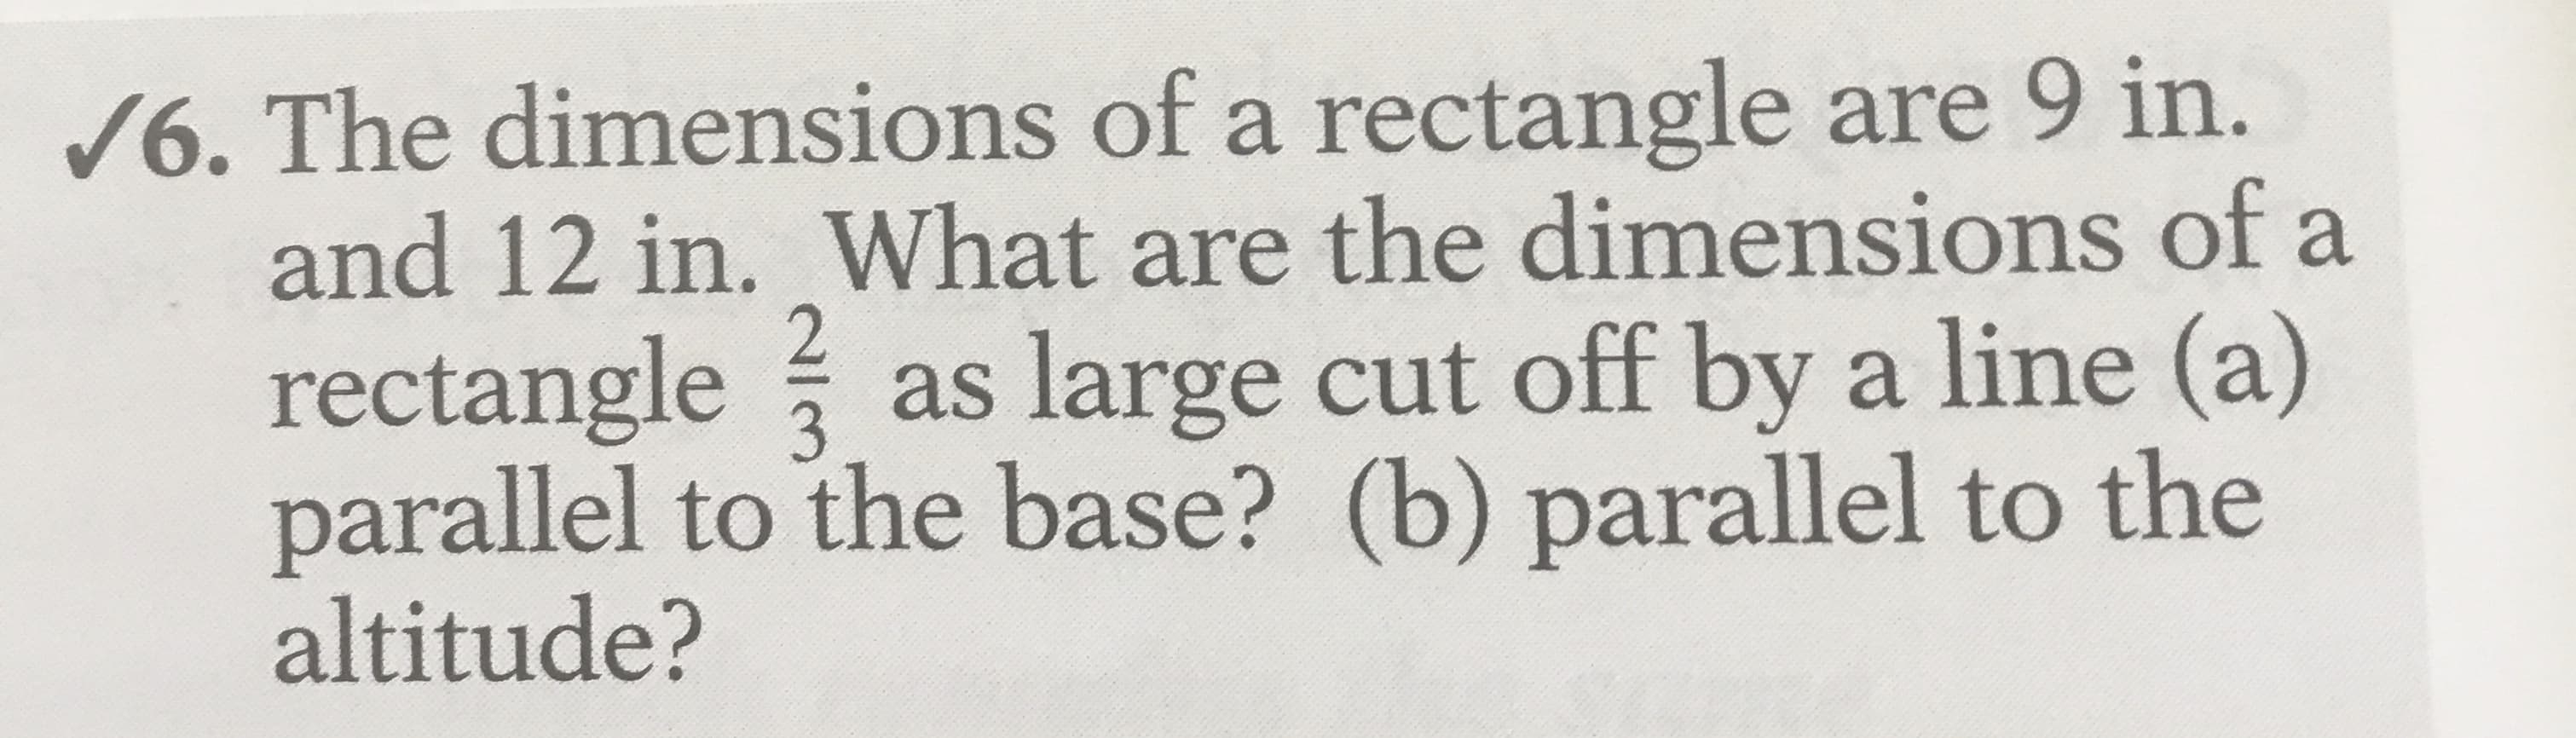 /6. The dimensions of a rectangle are 9 in.
and 12 in. What are the dimensions of a
rectangle as large cut off by a line (a)
parallel to the base? (b) parallel to the
altitude?
3
